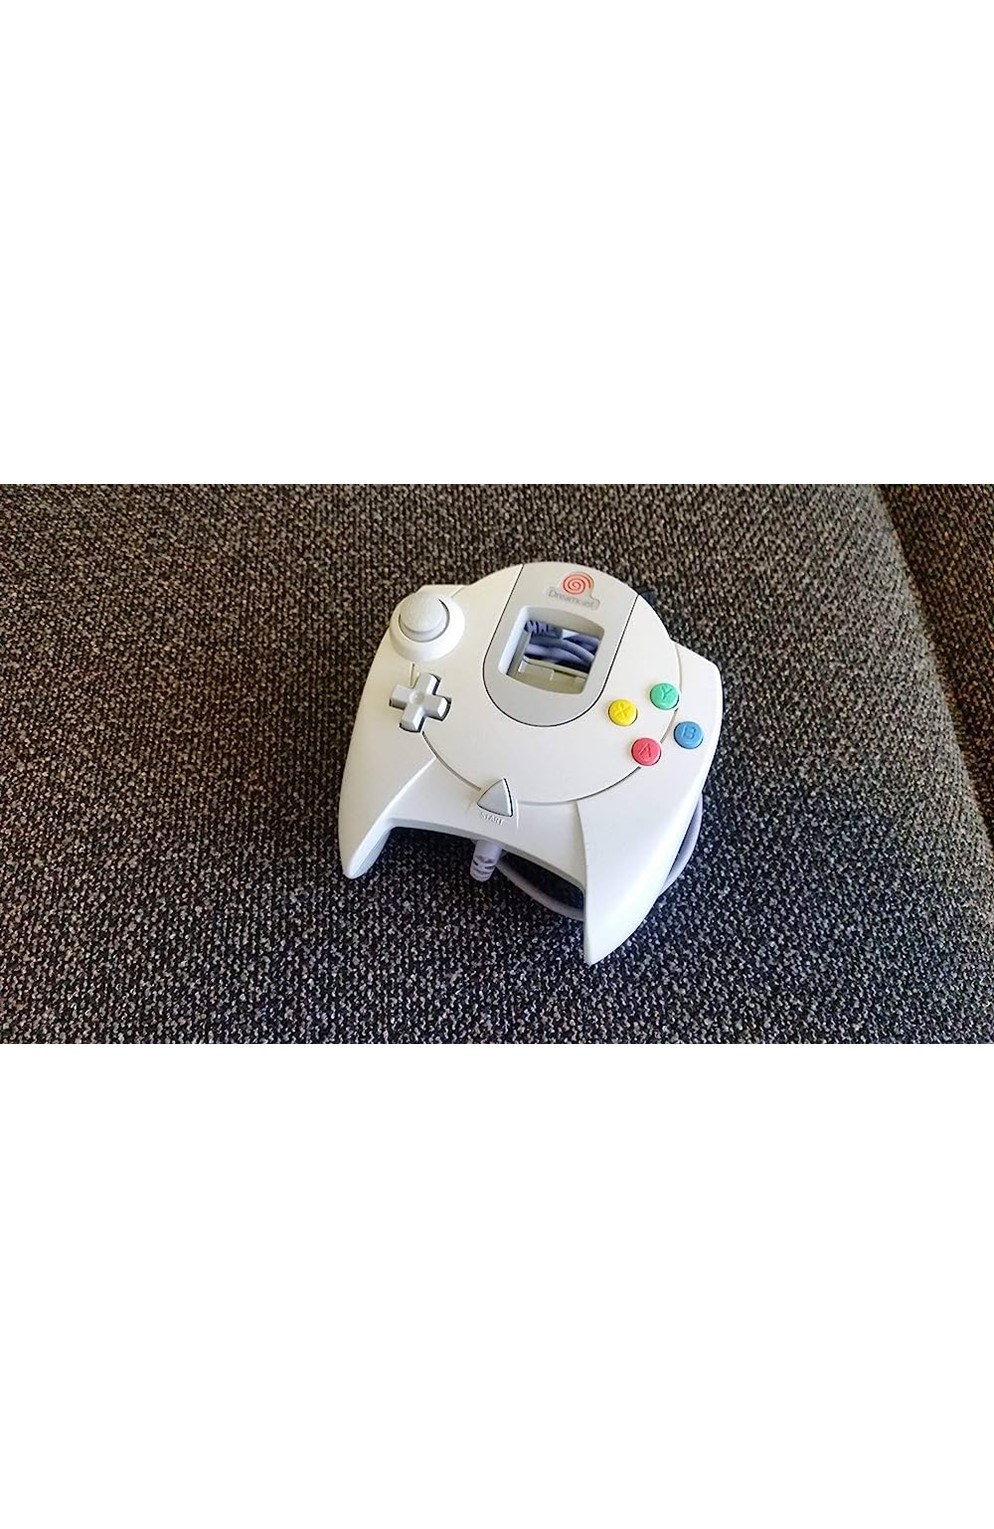 Dreamcast Controller Pre-Owned